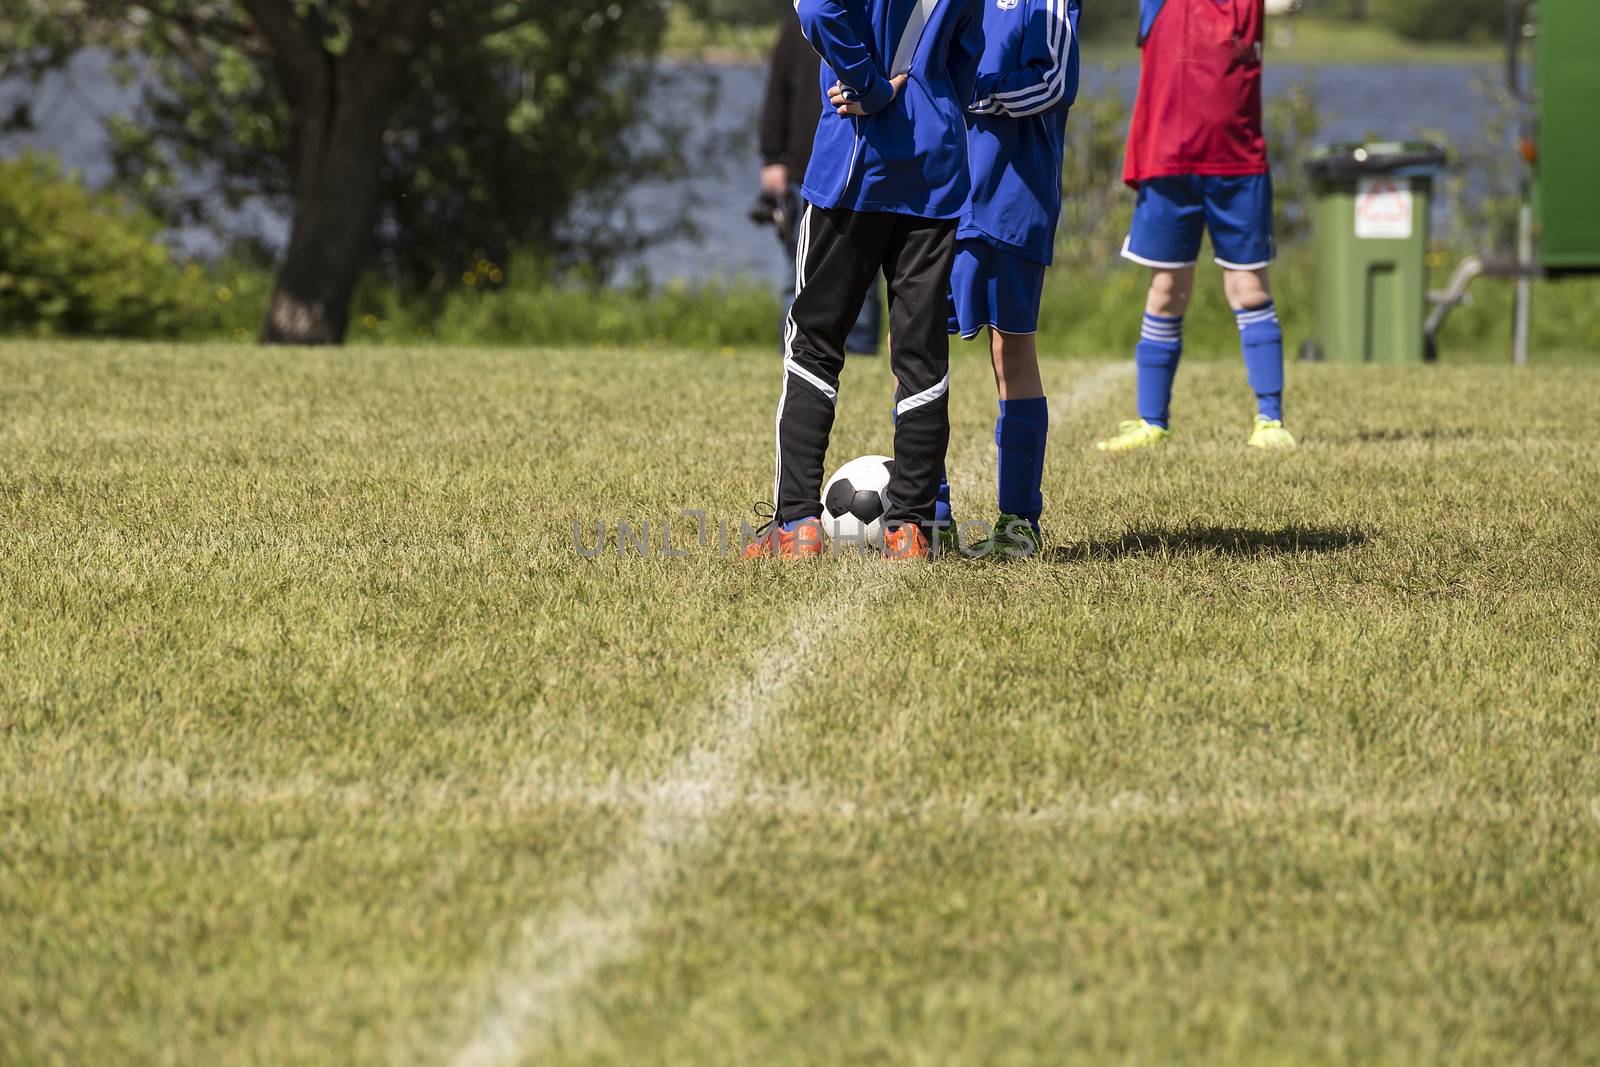 Three soccer players waiting for the referee to start the game.